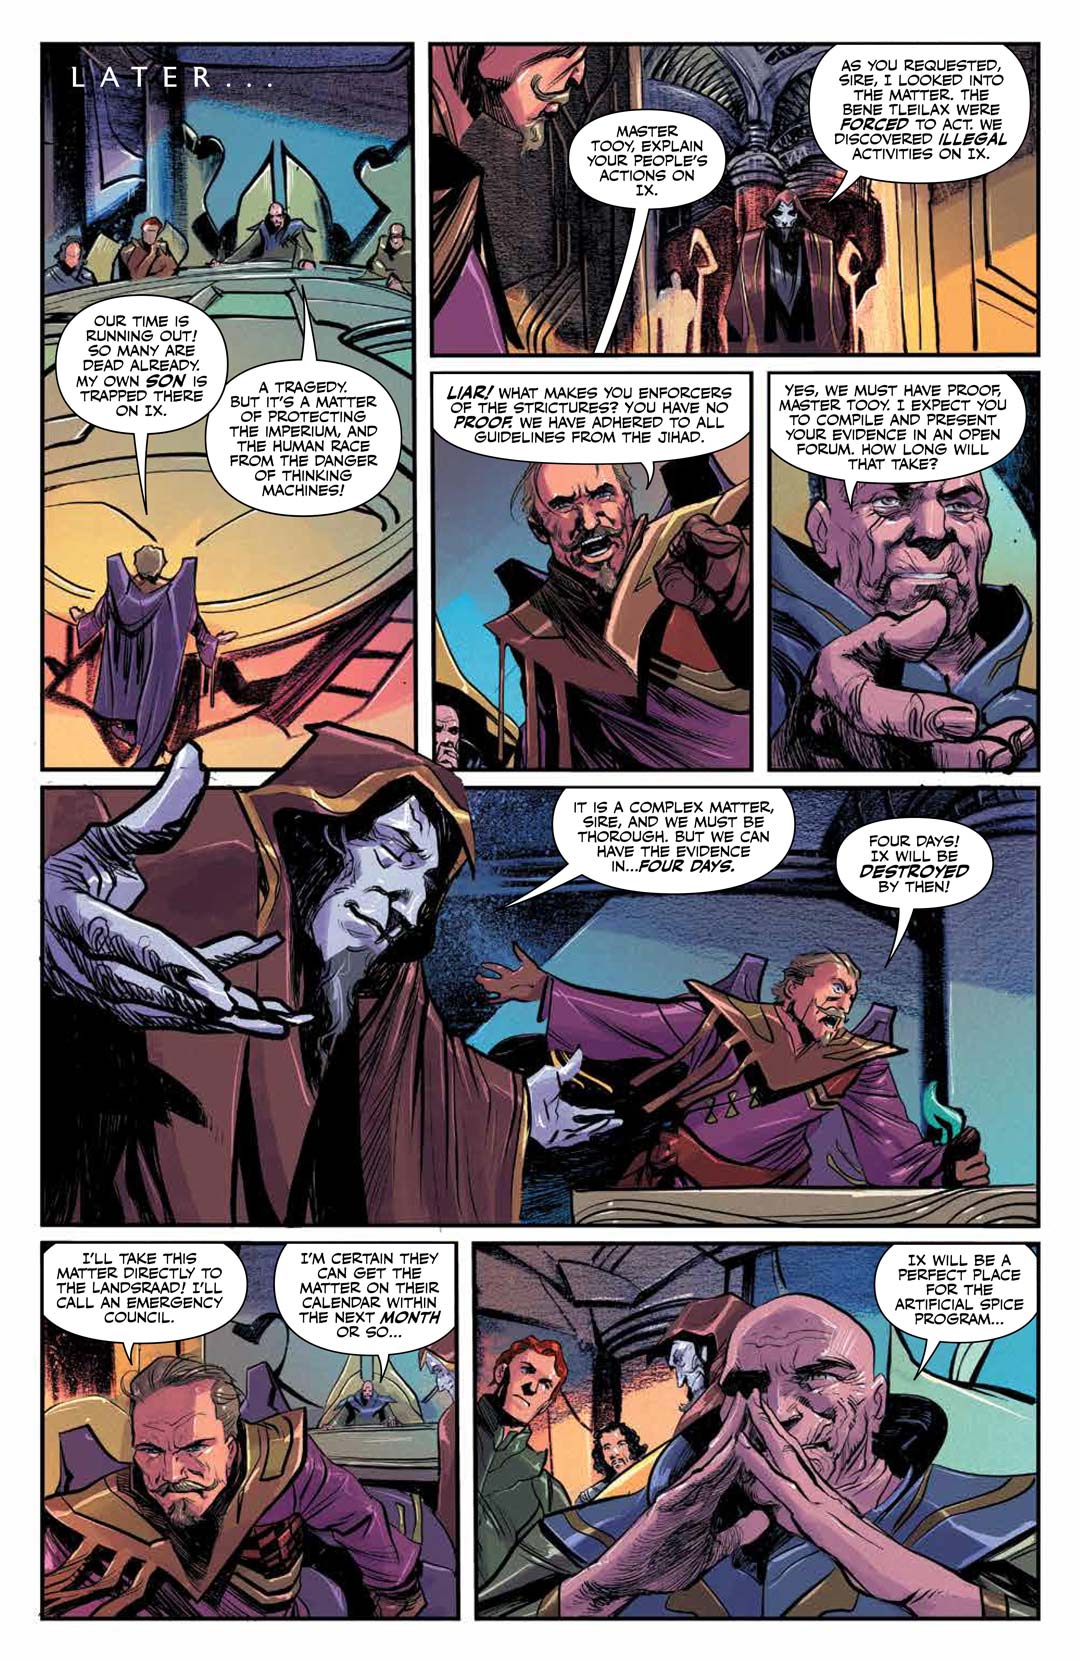 Dune: House Atreides comic series. Issue #6, preview page 5.